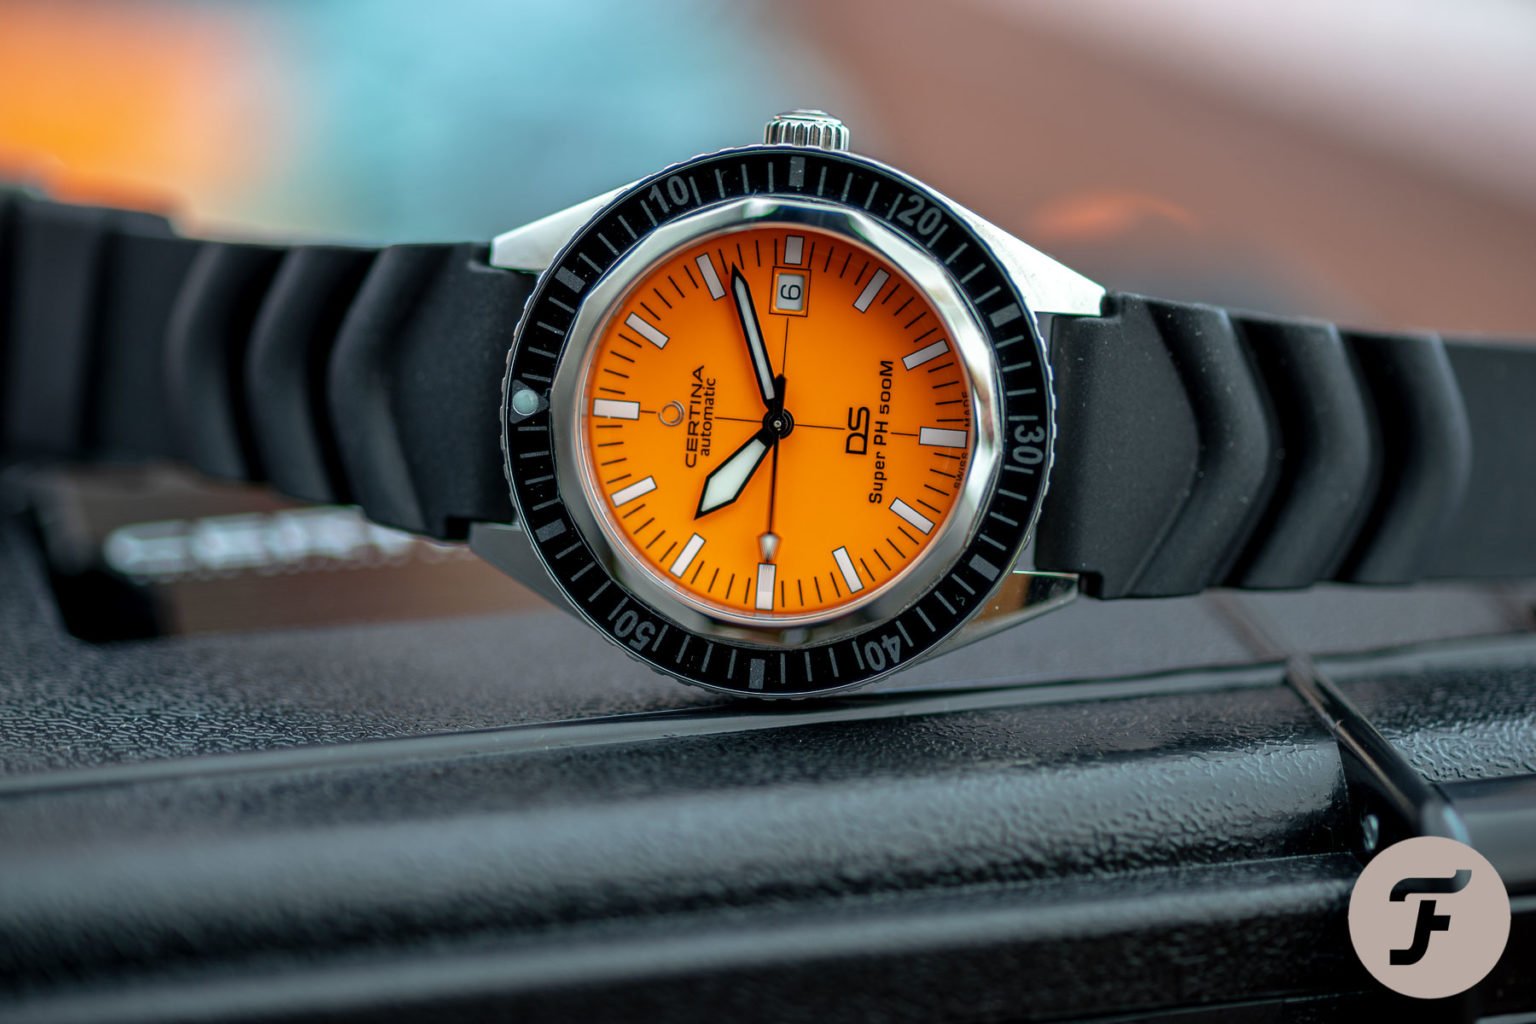 Hands-On With The New Certina DS Super PH500M Dive Watch